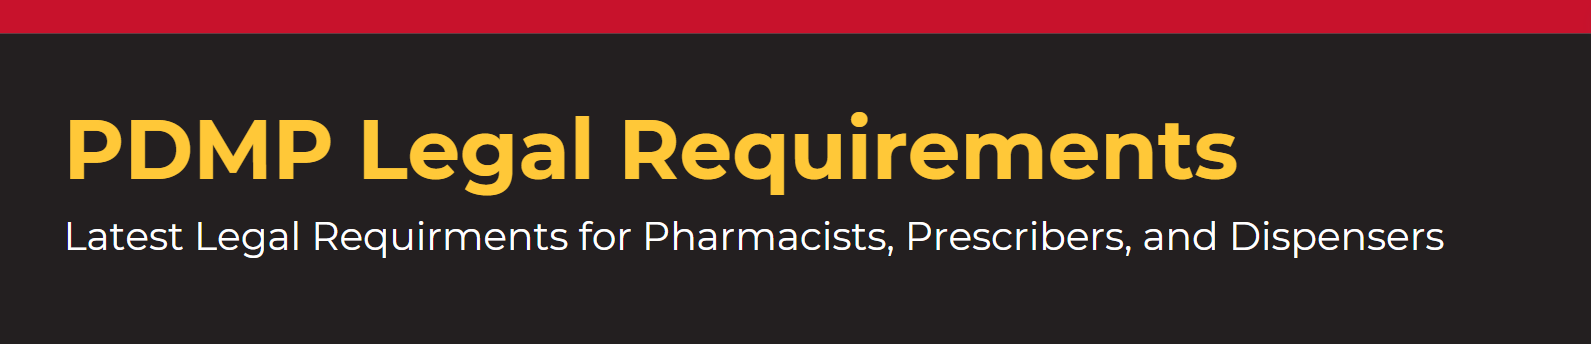 pdmp legal requirments for pharmacists, prescribers and dispensers